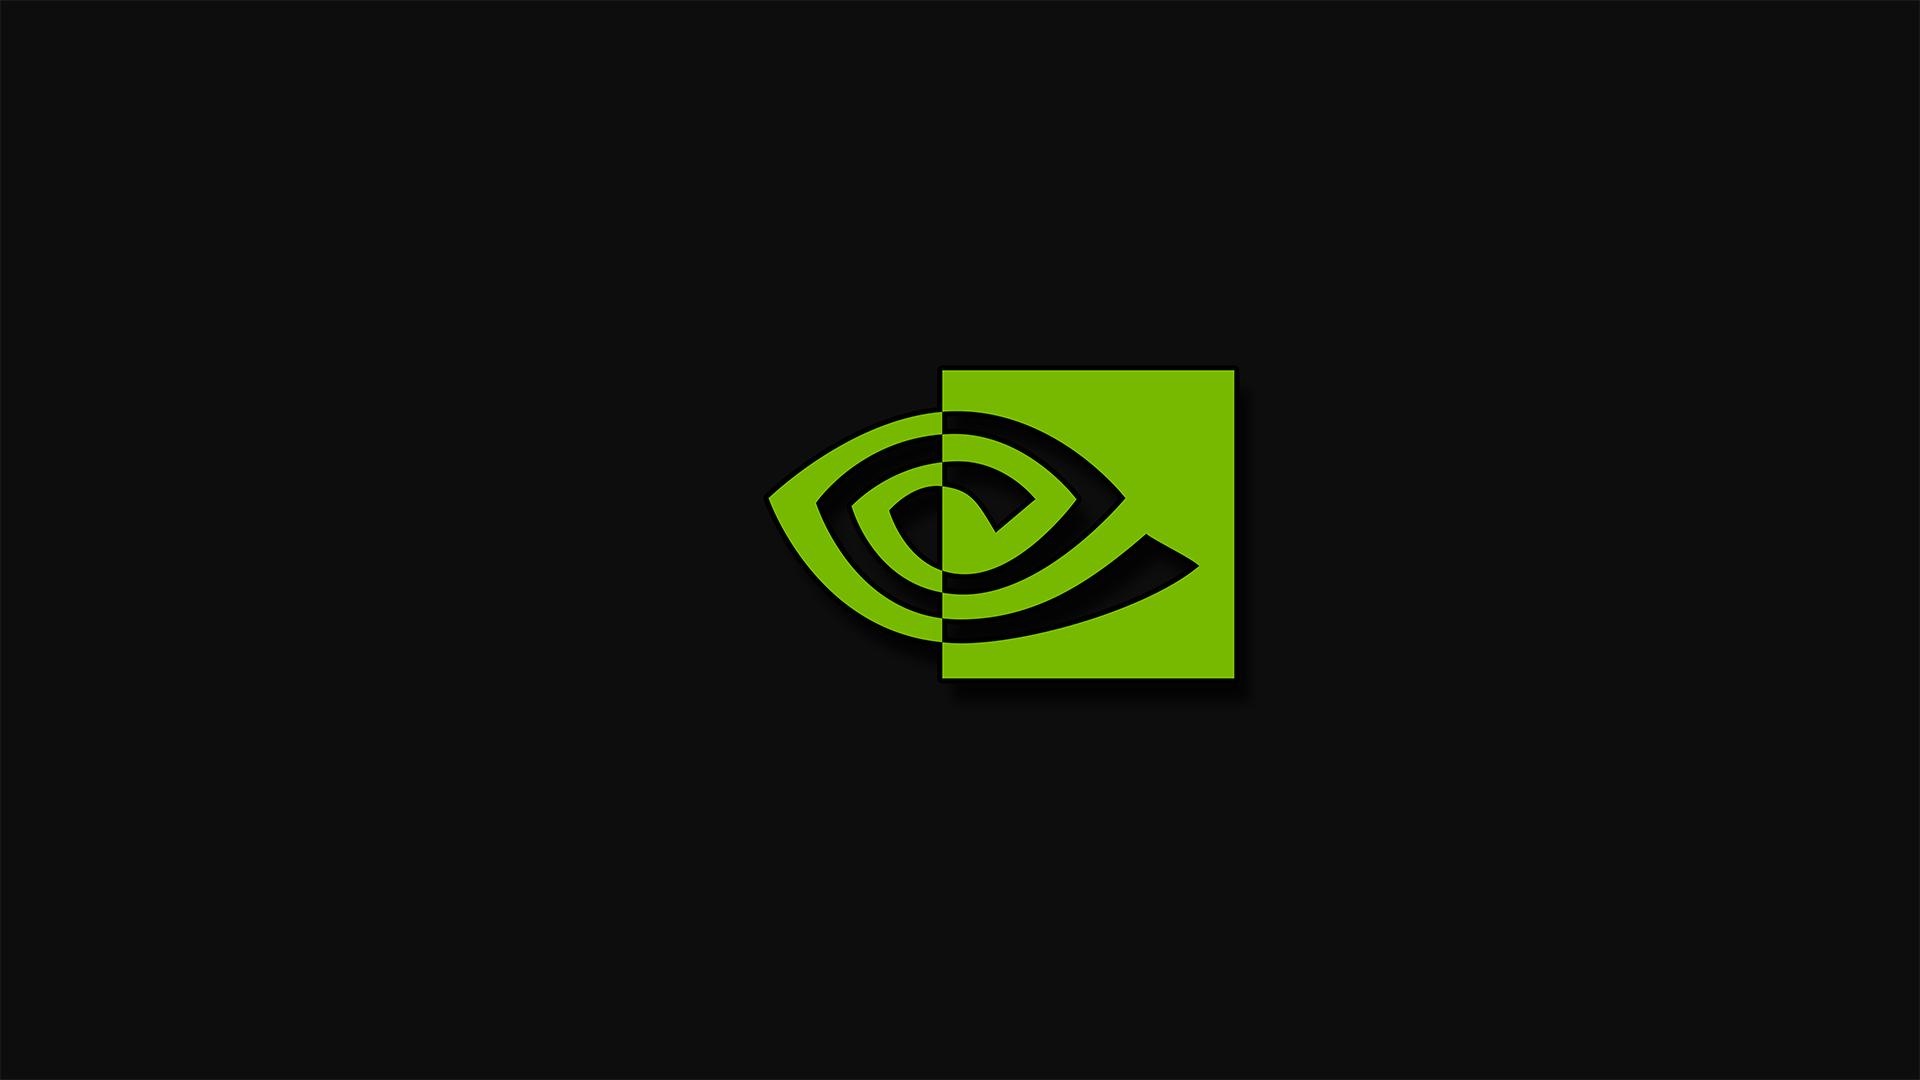 Nvidia: Total assets worth $5.55 billion and employed 7,133 people worldwide, An American technology company. 1920x1080 Full HD Background.